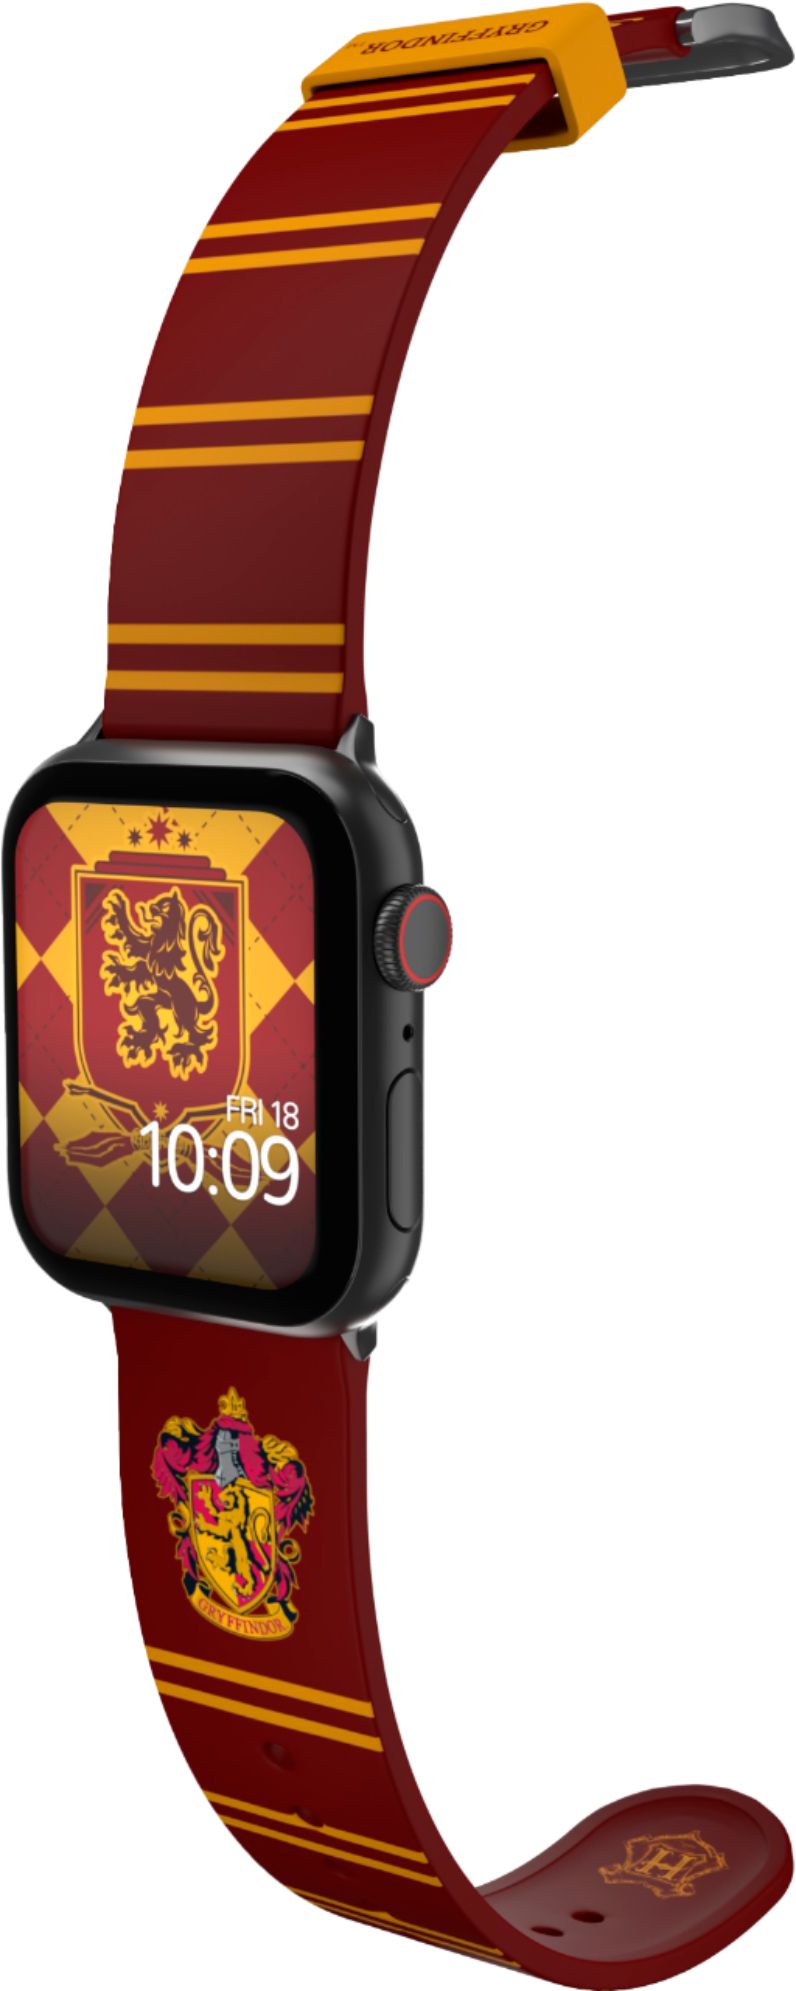 Left View: MobyFox - Harry Potter - Gryffindor Smartwatch Band - Compatible with Apple Watch - Fits 38mm, 40mm, 42mm and 44mm